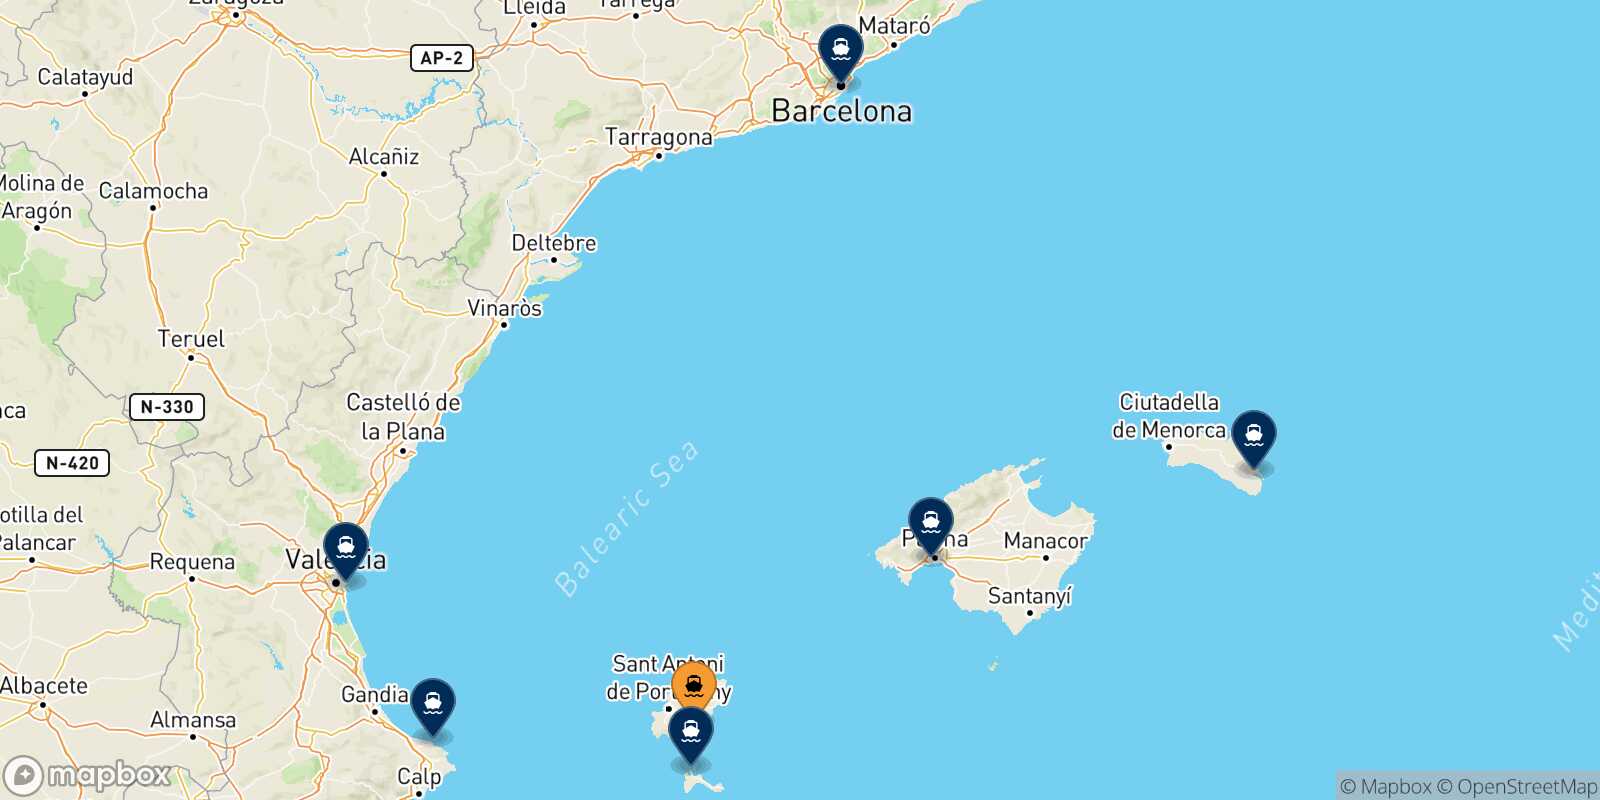 Map of the destinations reachable from Ibiza